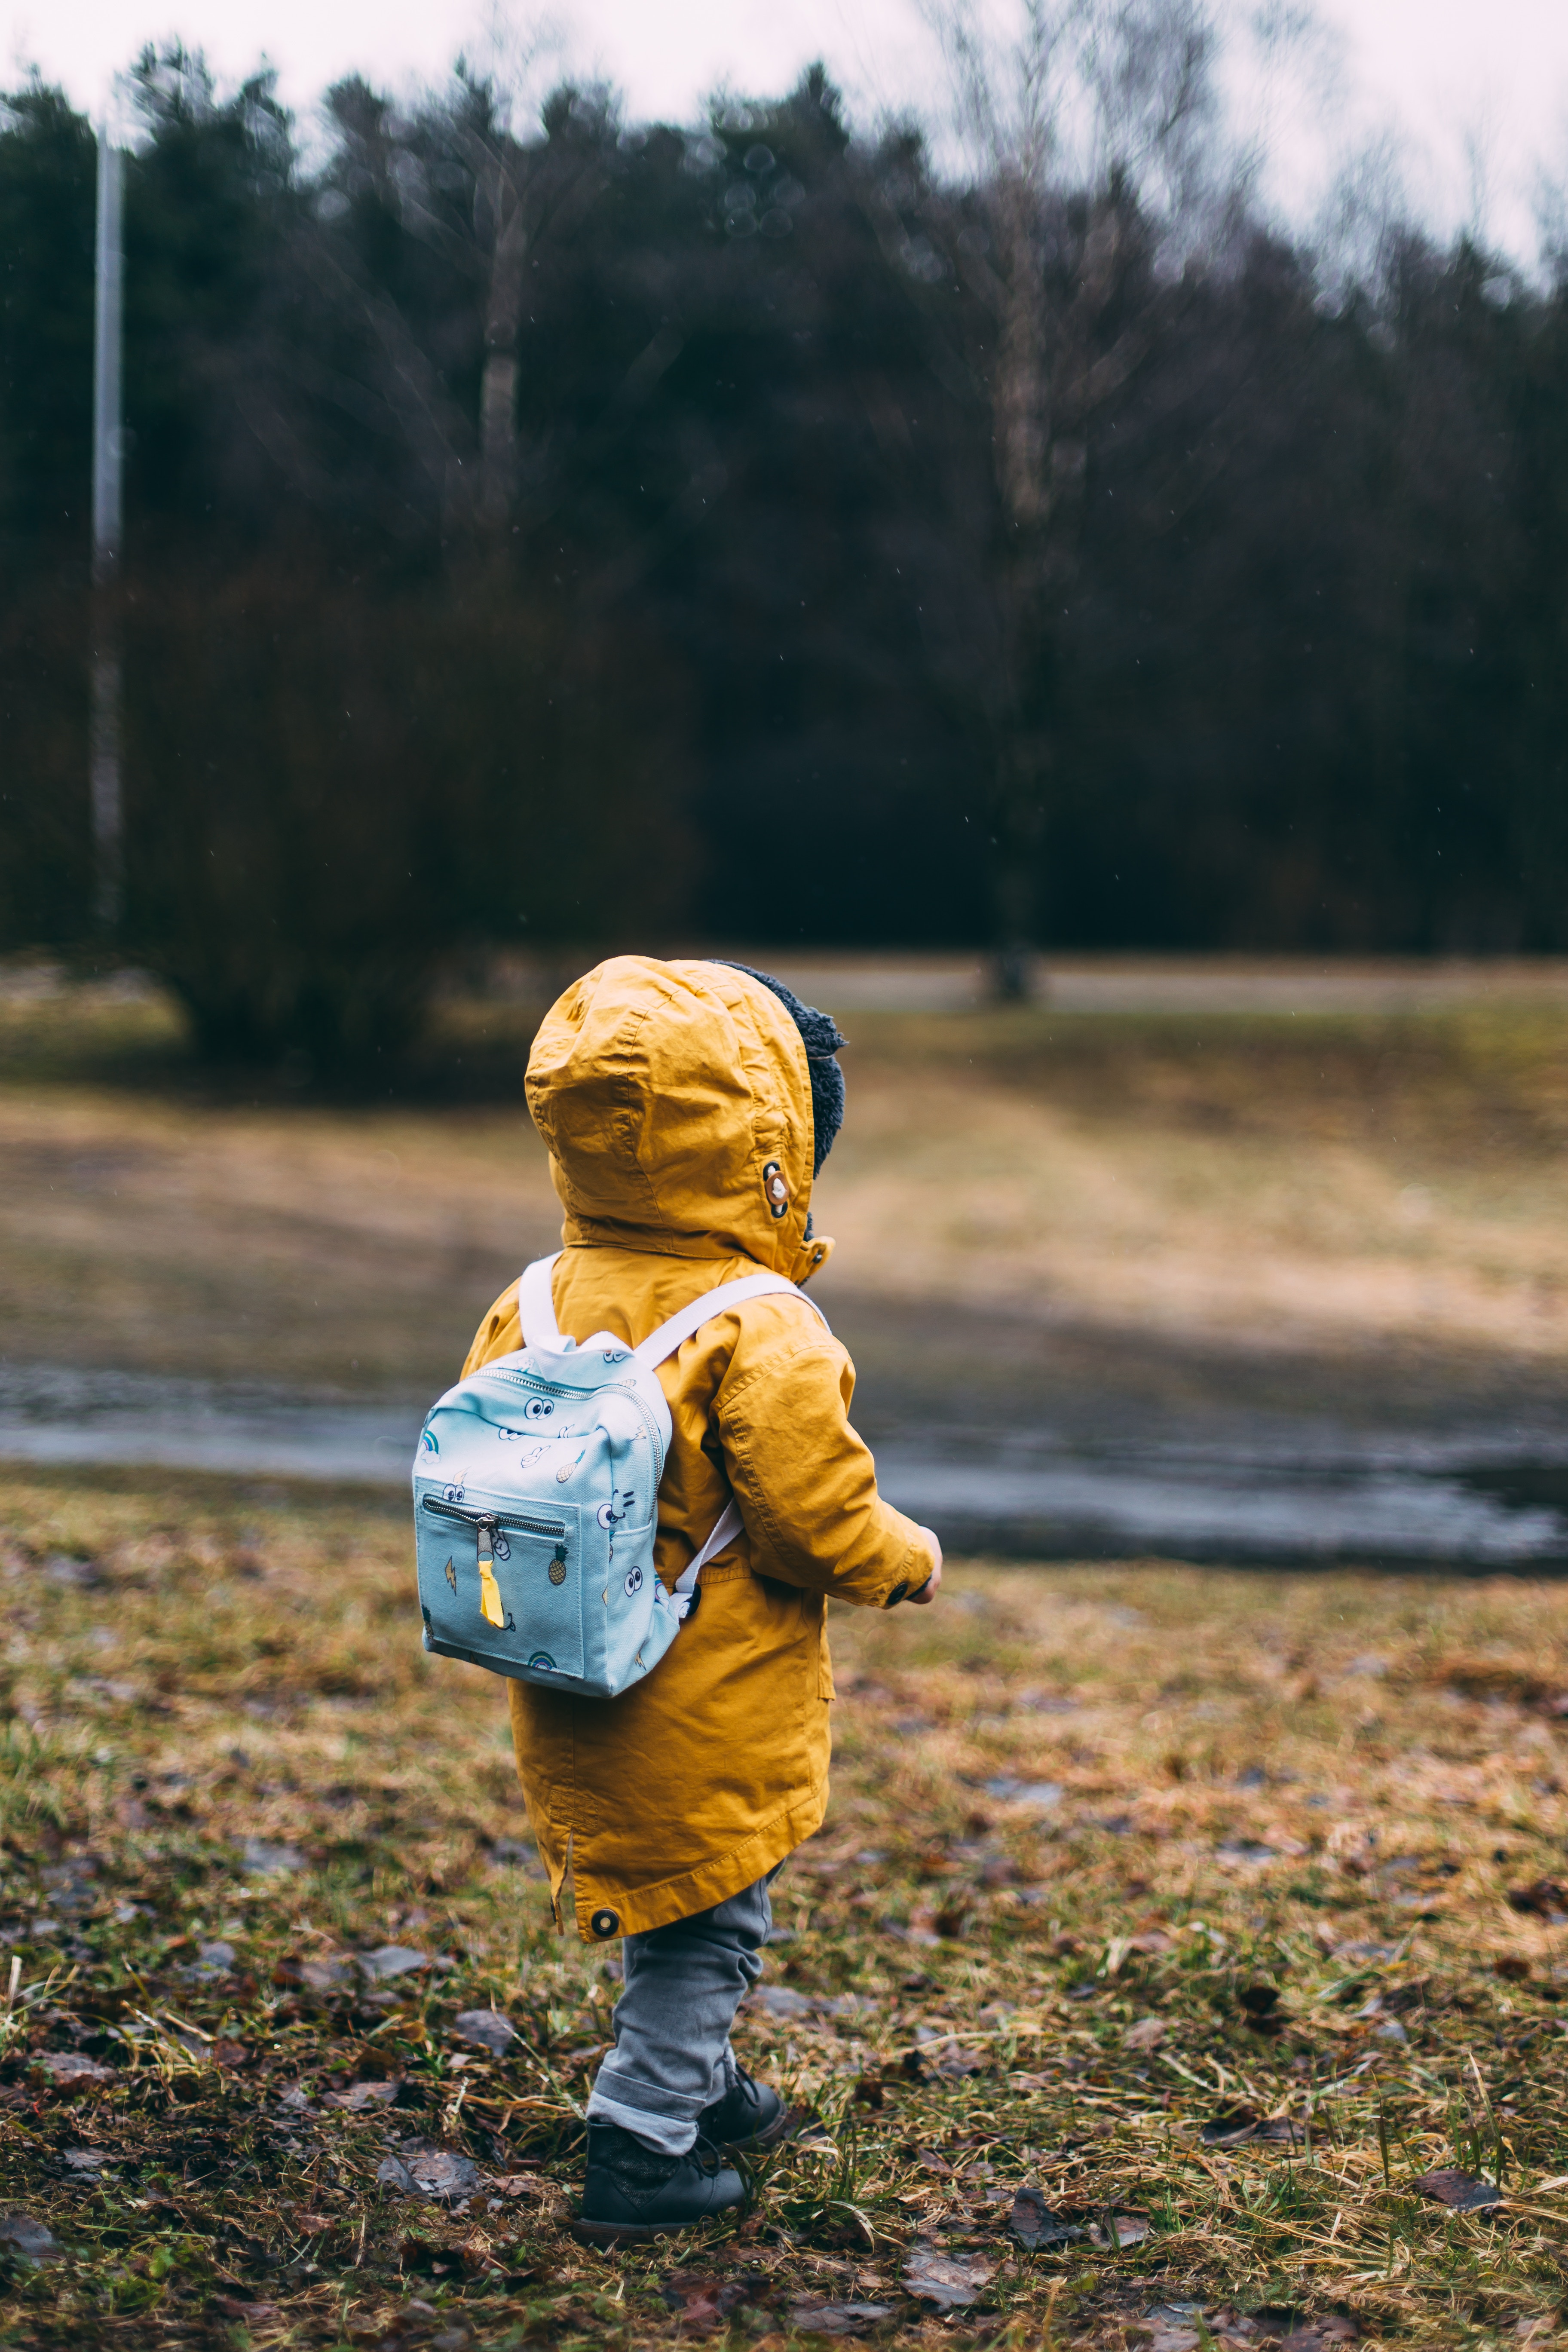 android child, miscellaneous, autumn, miscellanea, stroll, backpack, rucksack